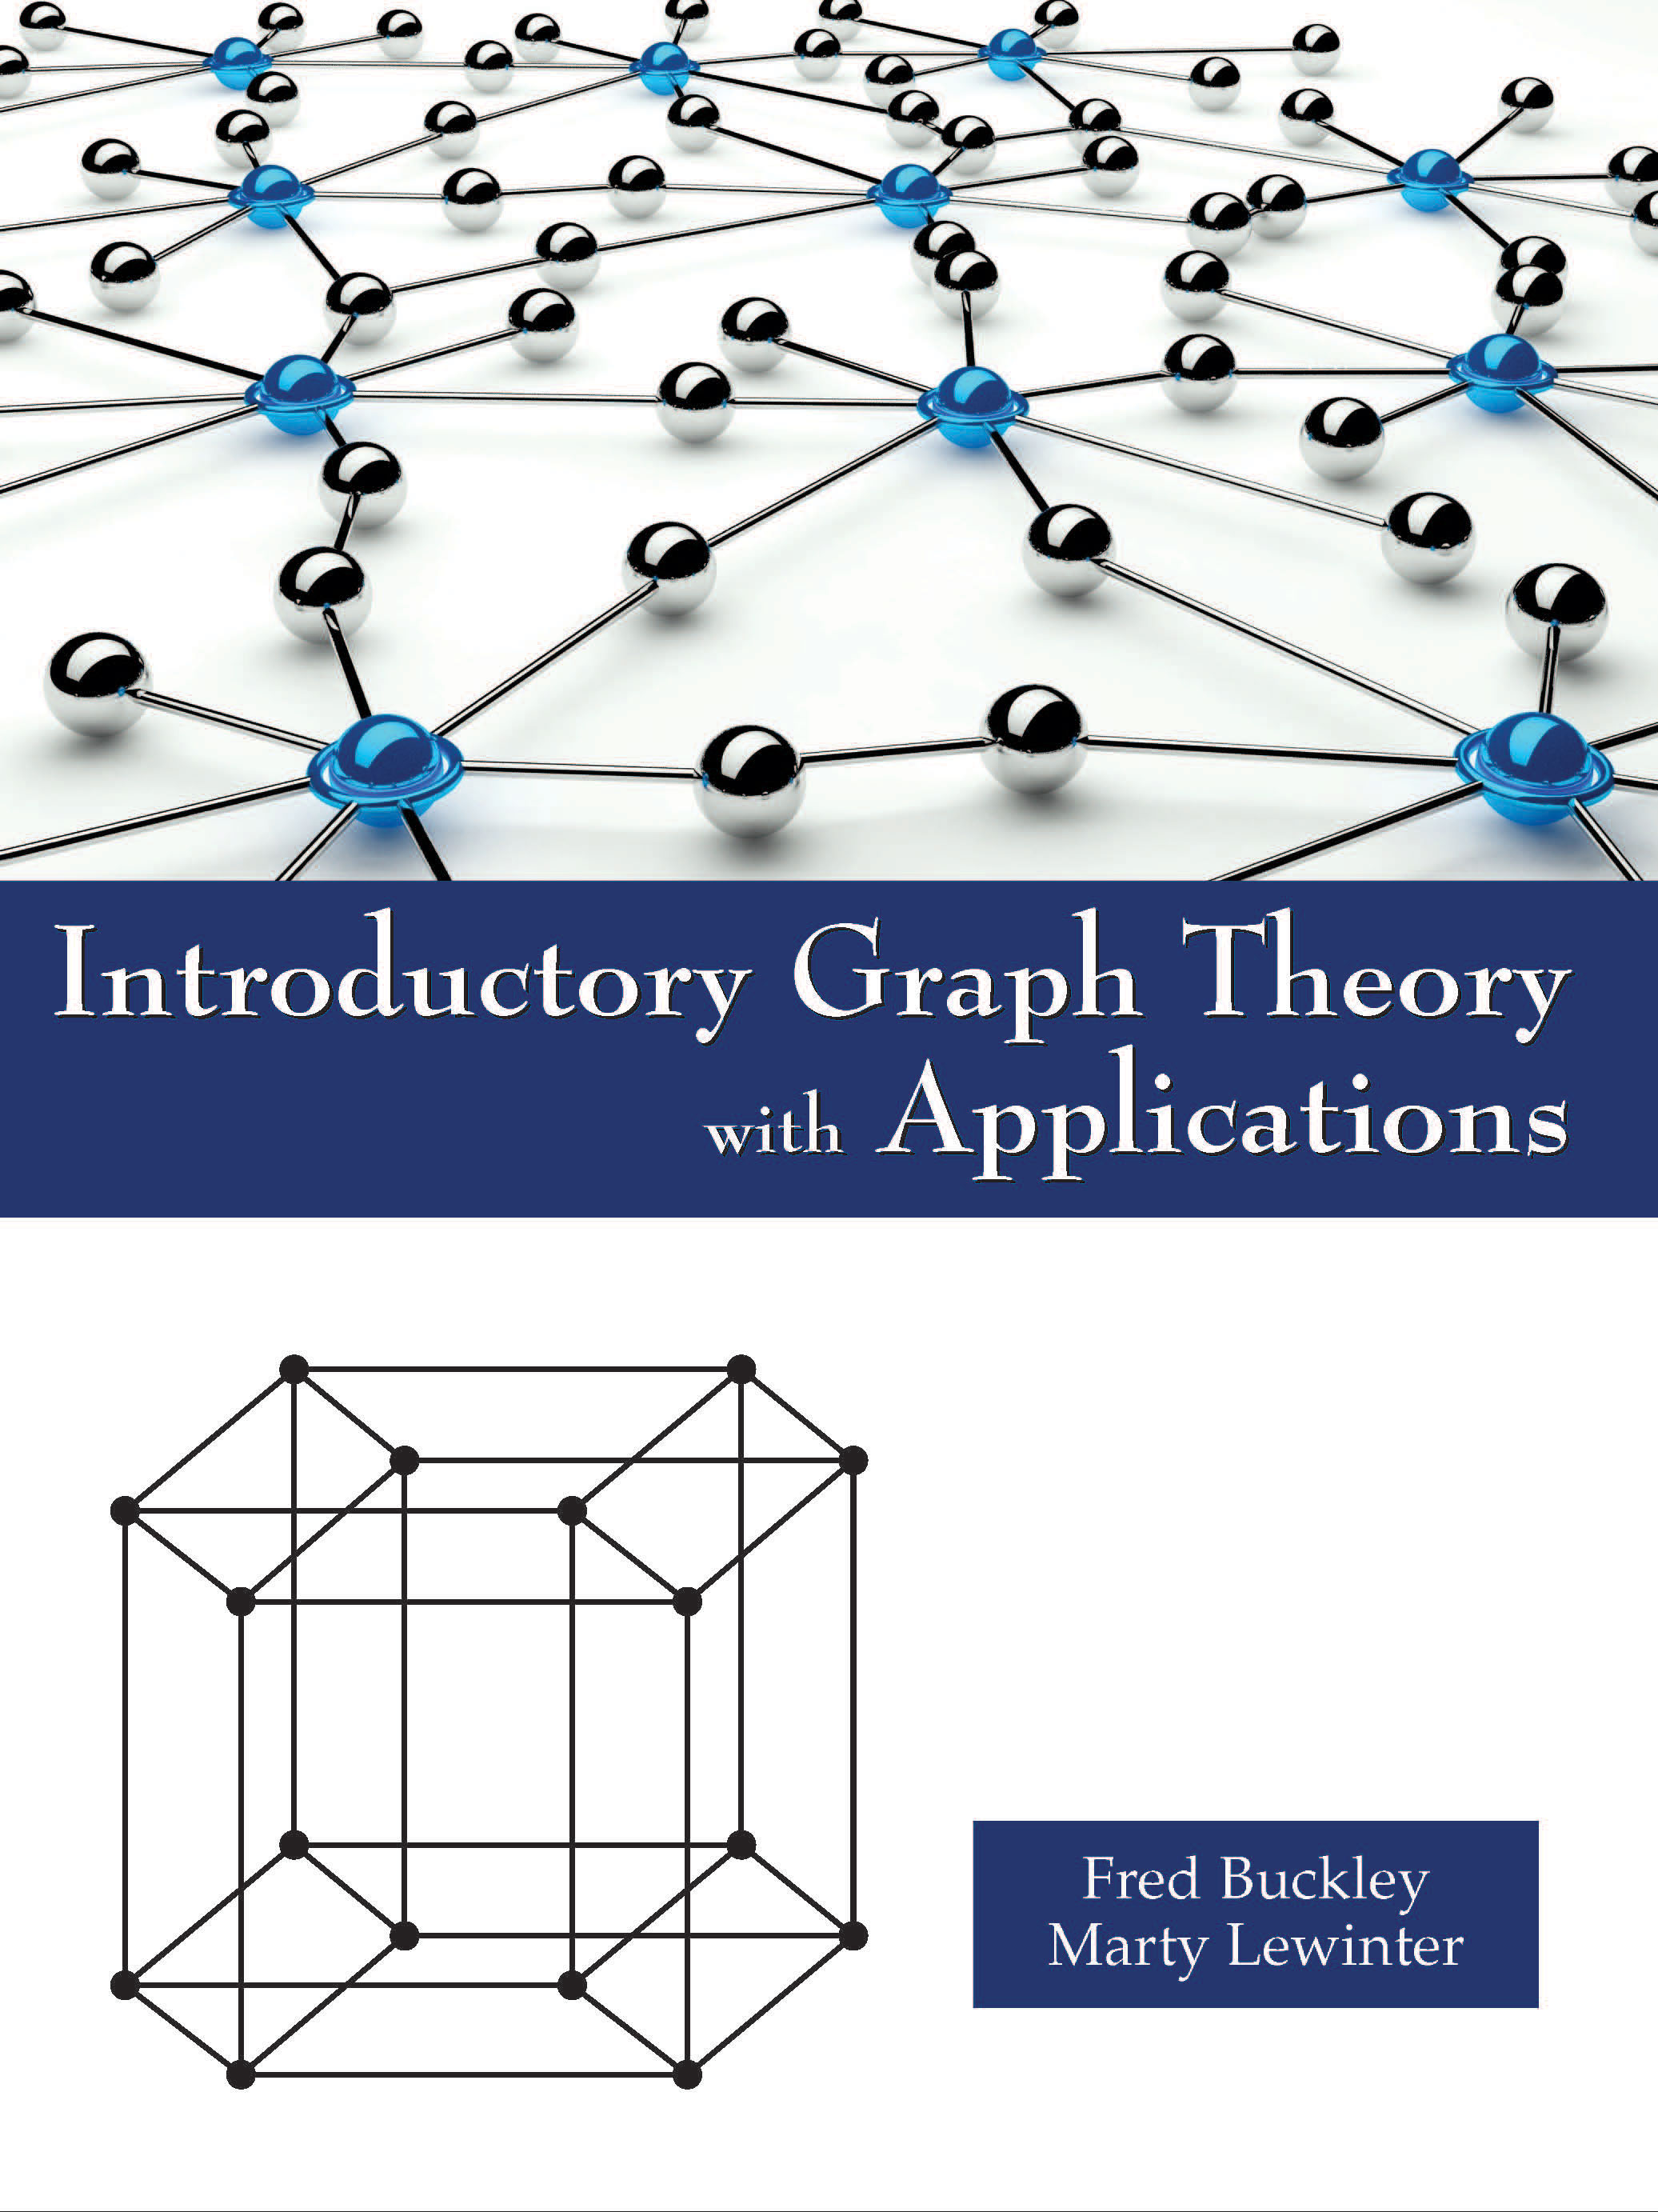 Introductory Graph Theory with Applications:  by Fred  Buckley, Marty  Lewinter